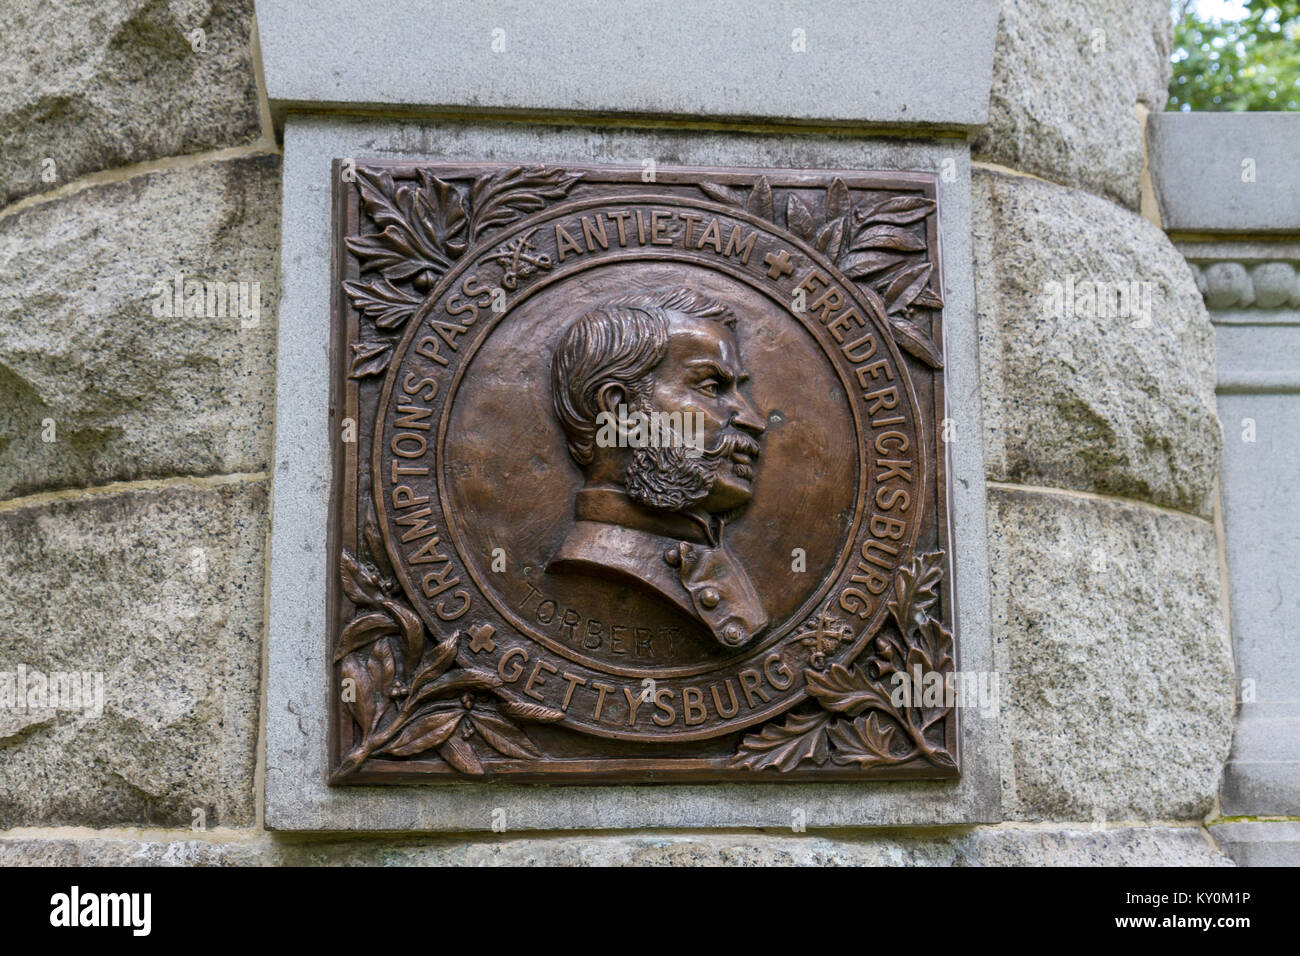 The 1st New Jersey Brigade Monument, Gettysburg National Military Park, Pennsylvania, United States. Stock Photo